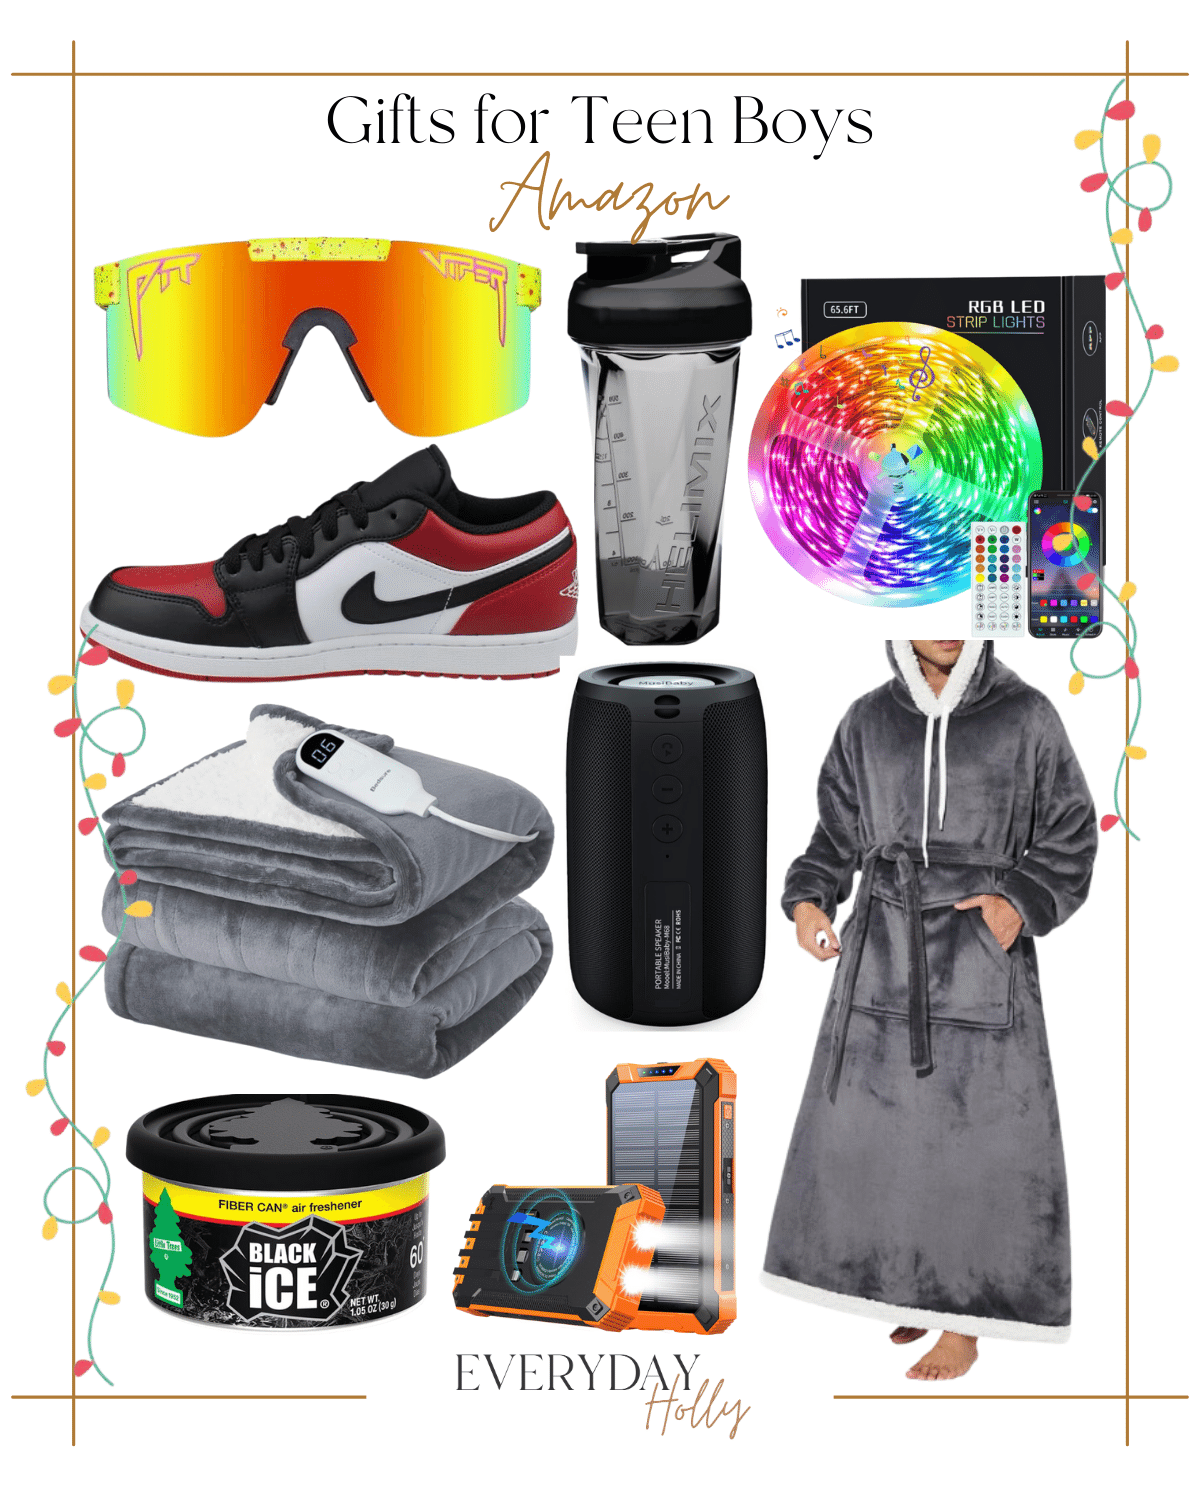 10 Holiday Gift Guides for Everyone This Season | #holiday #giftguide #giftideas #2023 #christmas #gifts #amazon #giftforteenboys #sunglasses #blenderbottle #LEDlights #heatedblanket #sneakers #speaker #carfreshener #powerbank #sherpa